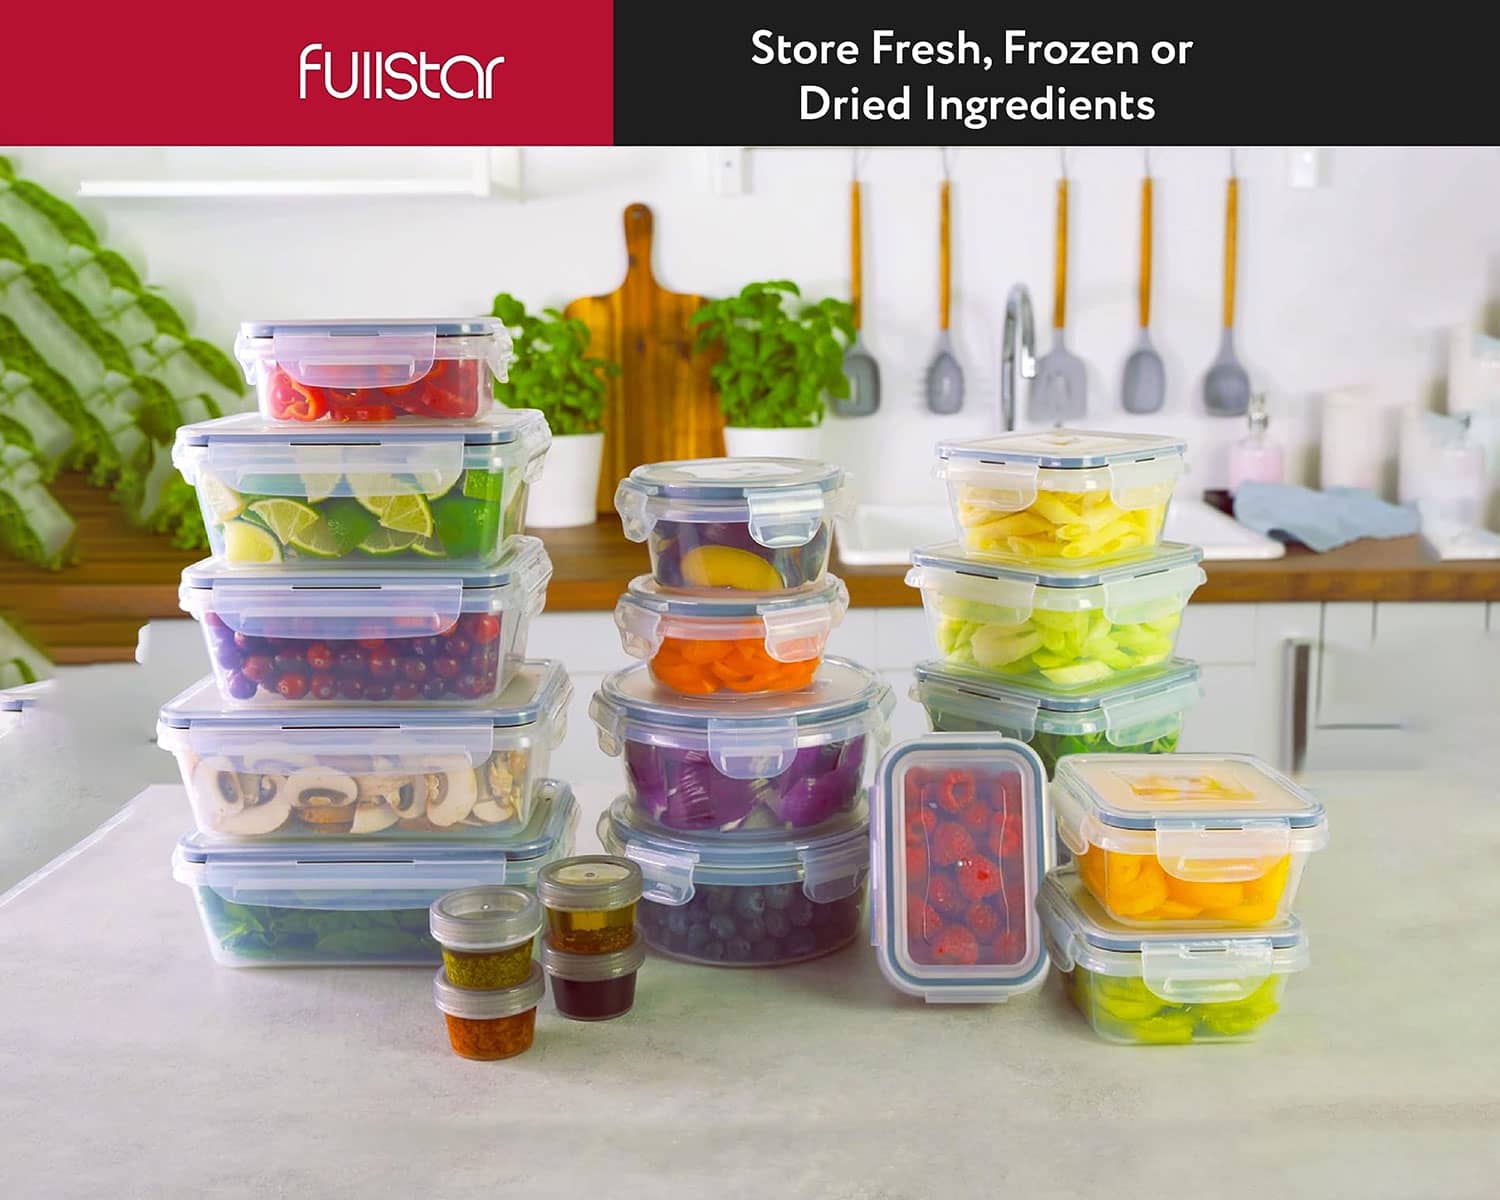 fullstar 50-piece Food storage Containers Set with Lids, Plastic Leak-Proof BPA-Free Containers for Kitchen Organization